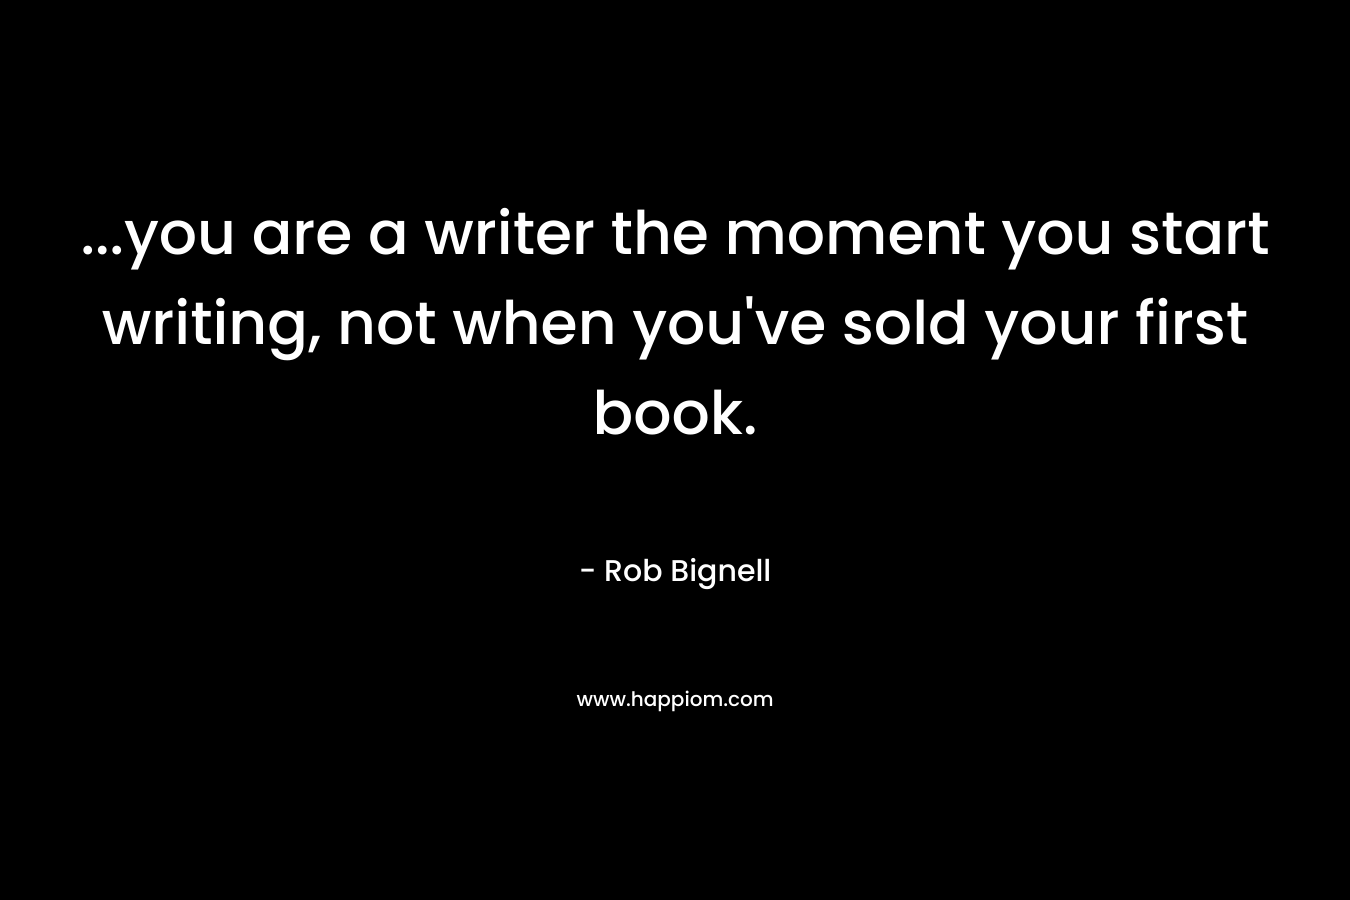 ...you are a writer the moment you start writing, not when you've sold your first book.